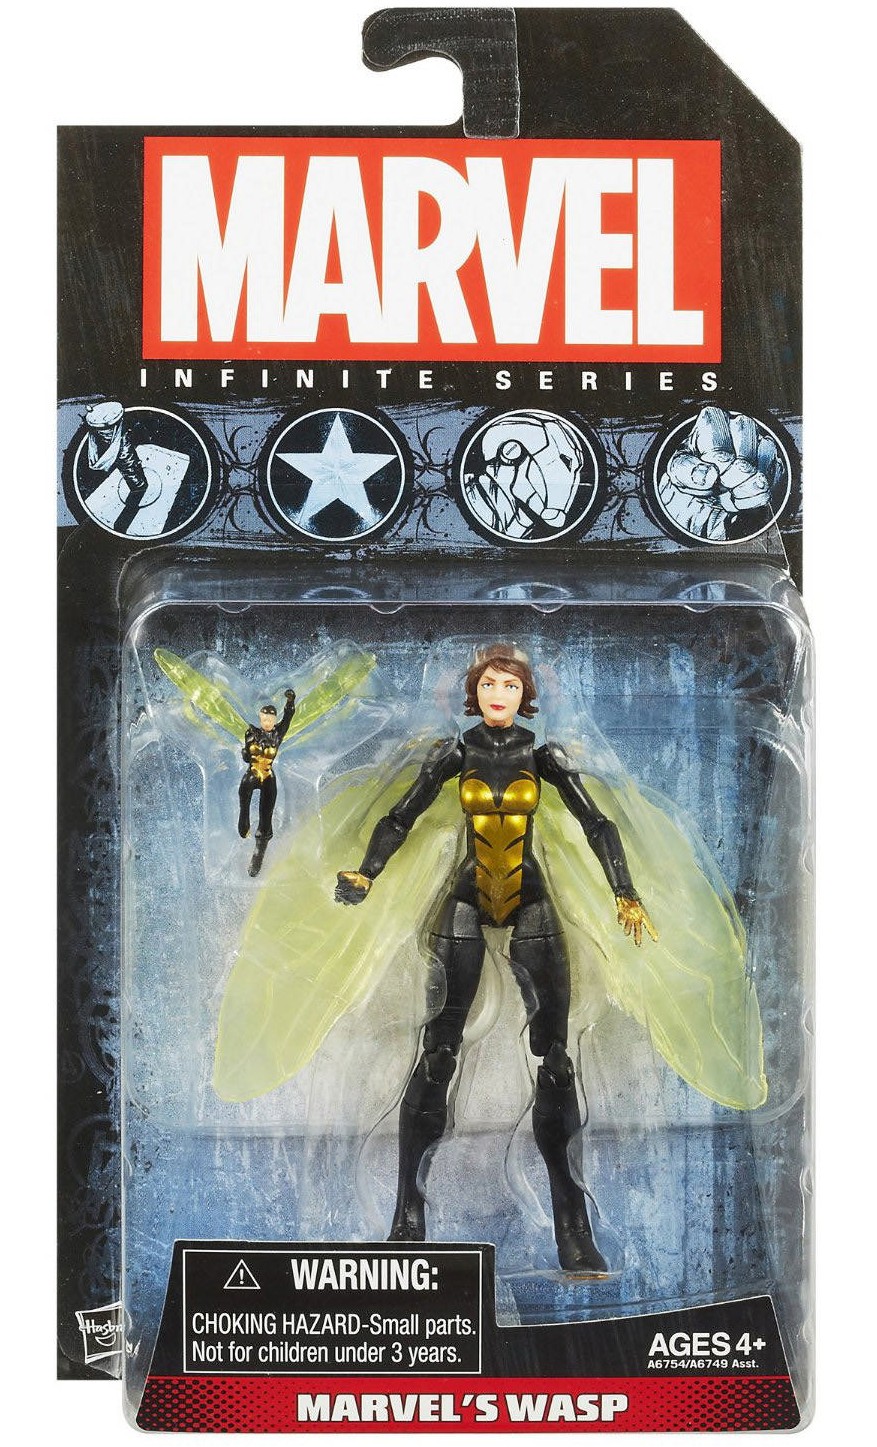 MARVEL universe Infinite Series 2013 WASP NEW FACTORY SEALED Comme neuf on Card 